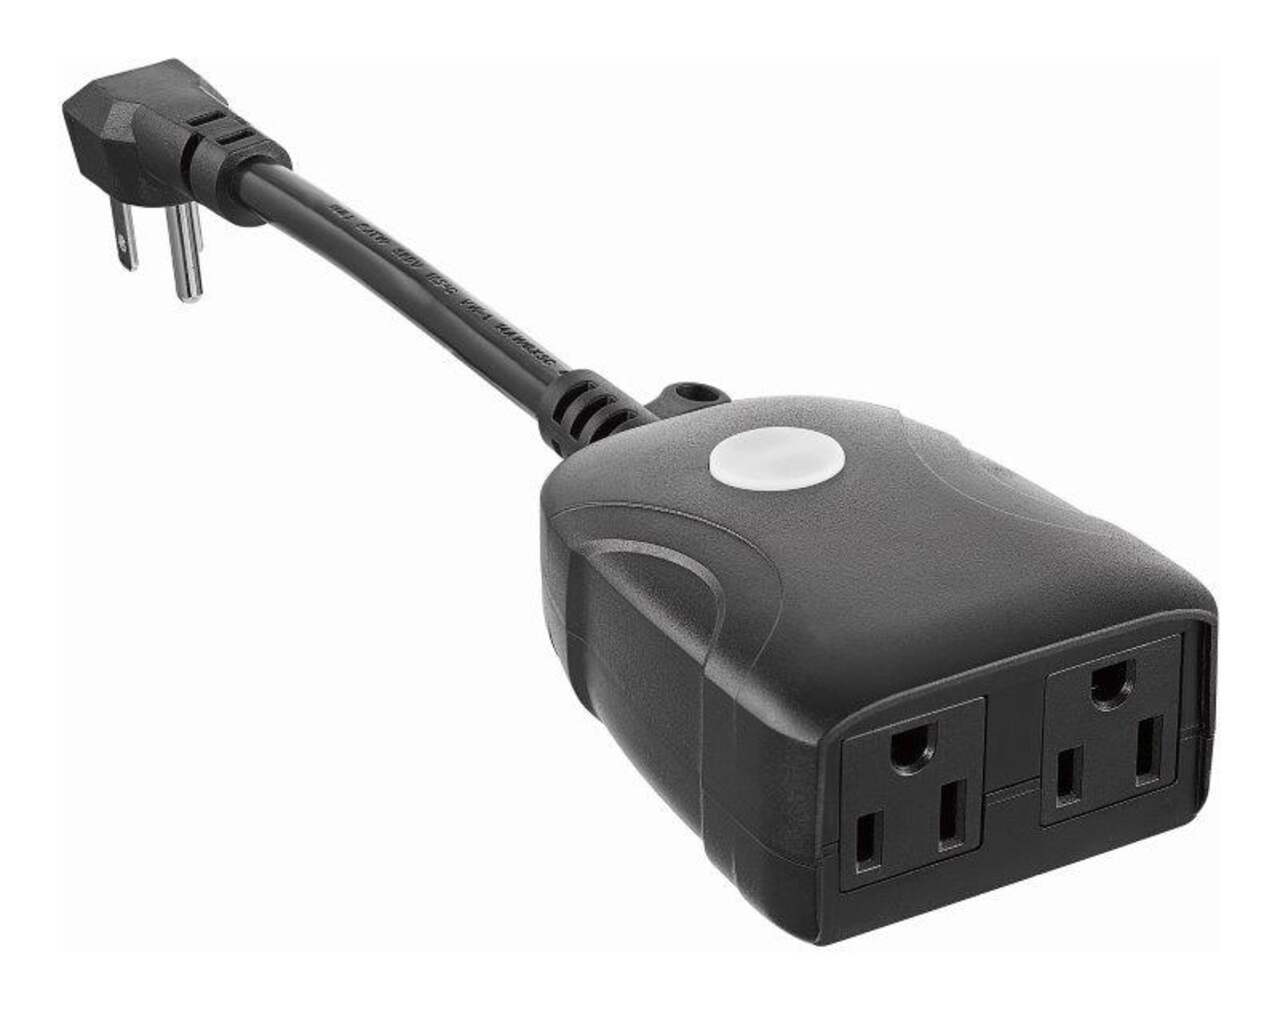 https://media-www.canadiantire.ca/product/fixing/electrical/power-bars-extension-cords-timers/1522518/noma-iq-outdoor-2-outlet-smart-plug-b19a5c1a-e89e-4274-9783-1c23d74578df.png?imdensity=1&imwidth=1244&impolicy=mZoom